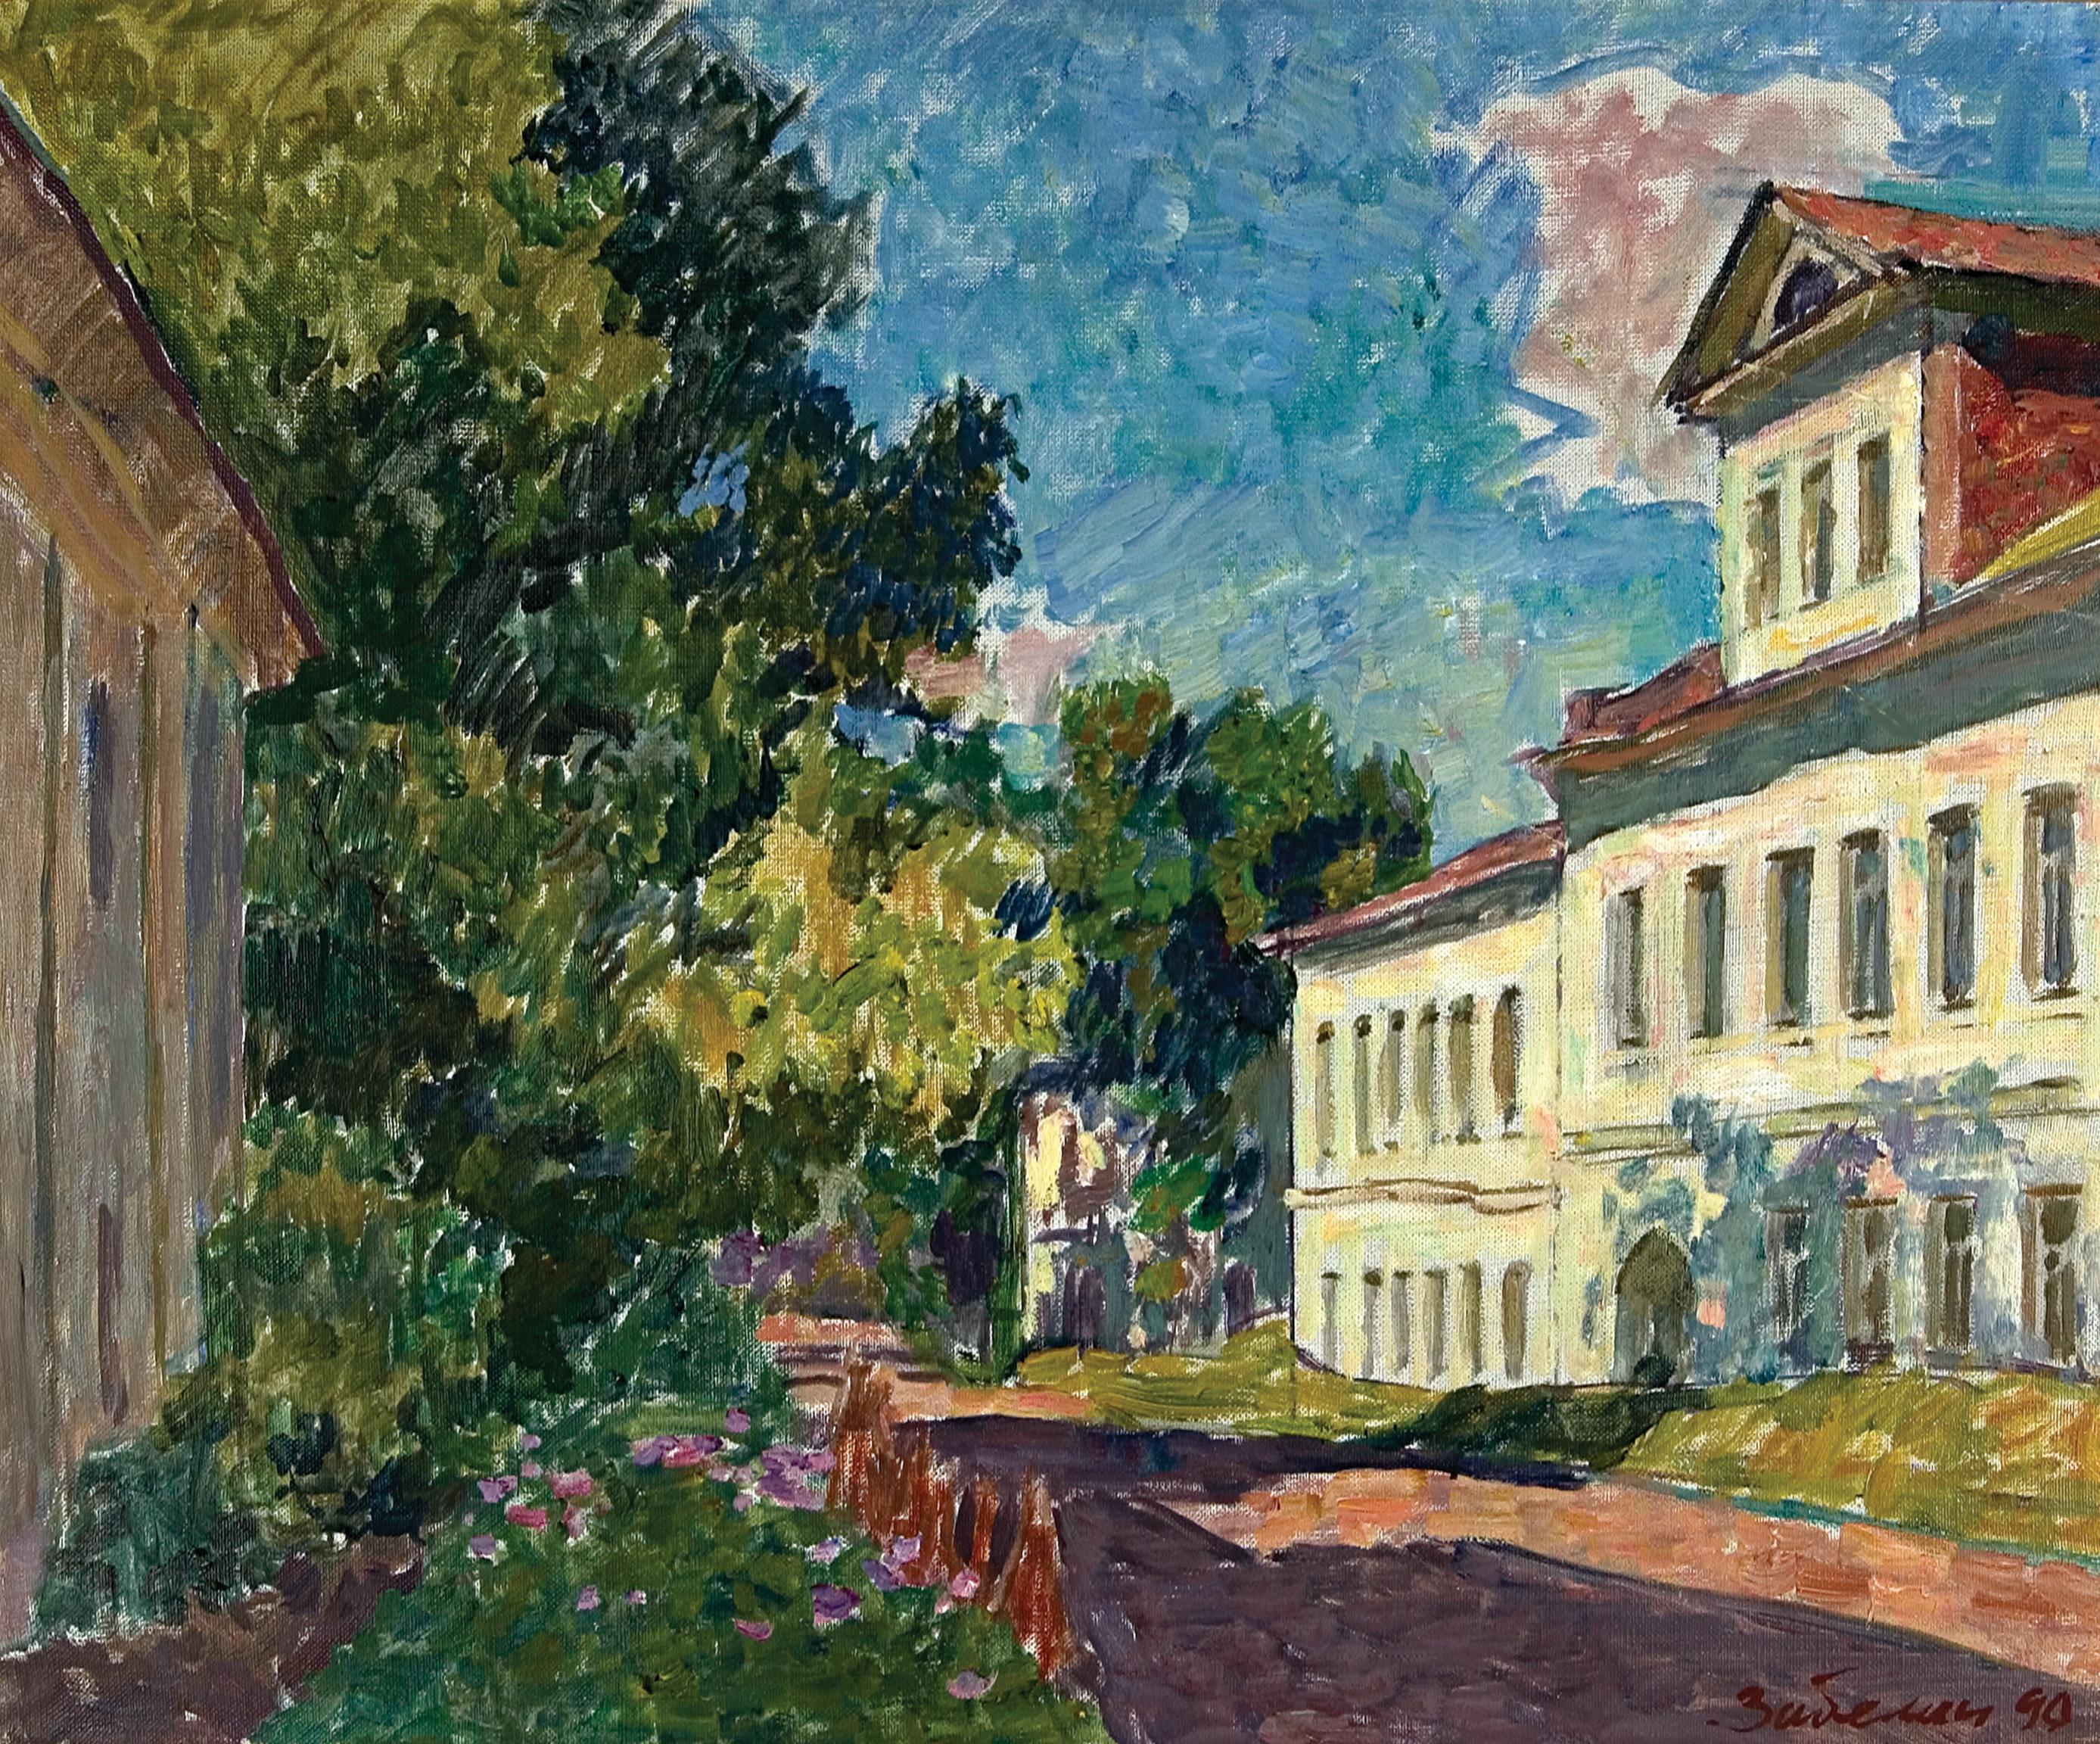 Vyacheslav Zabelin (1935- 2001) Considered a living master during his lifetime in Moscow, painted Street in Rostov in 1990. Zabelin had already 300 paintings in museum collections throughout the world at the time of his death. A Surikov professor